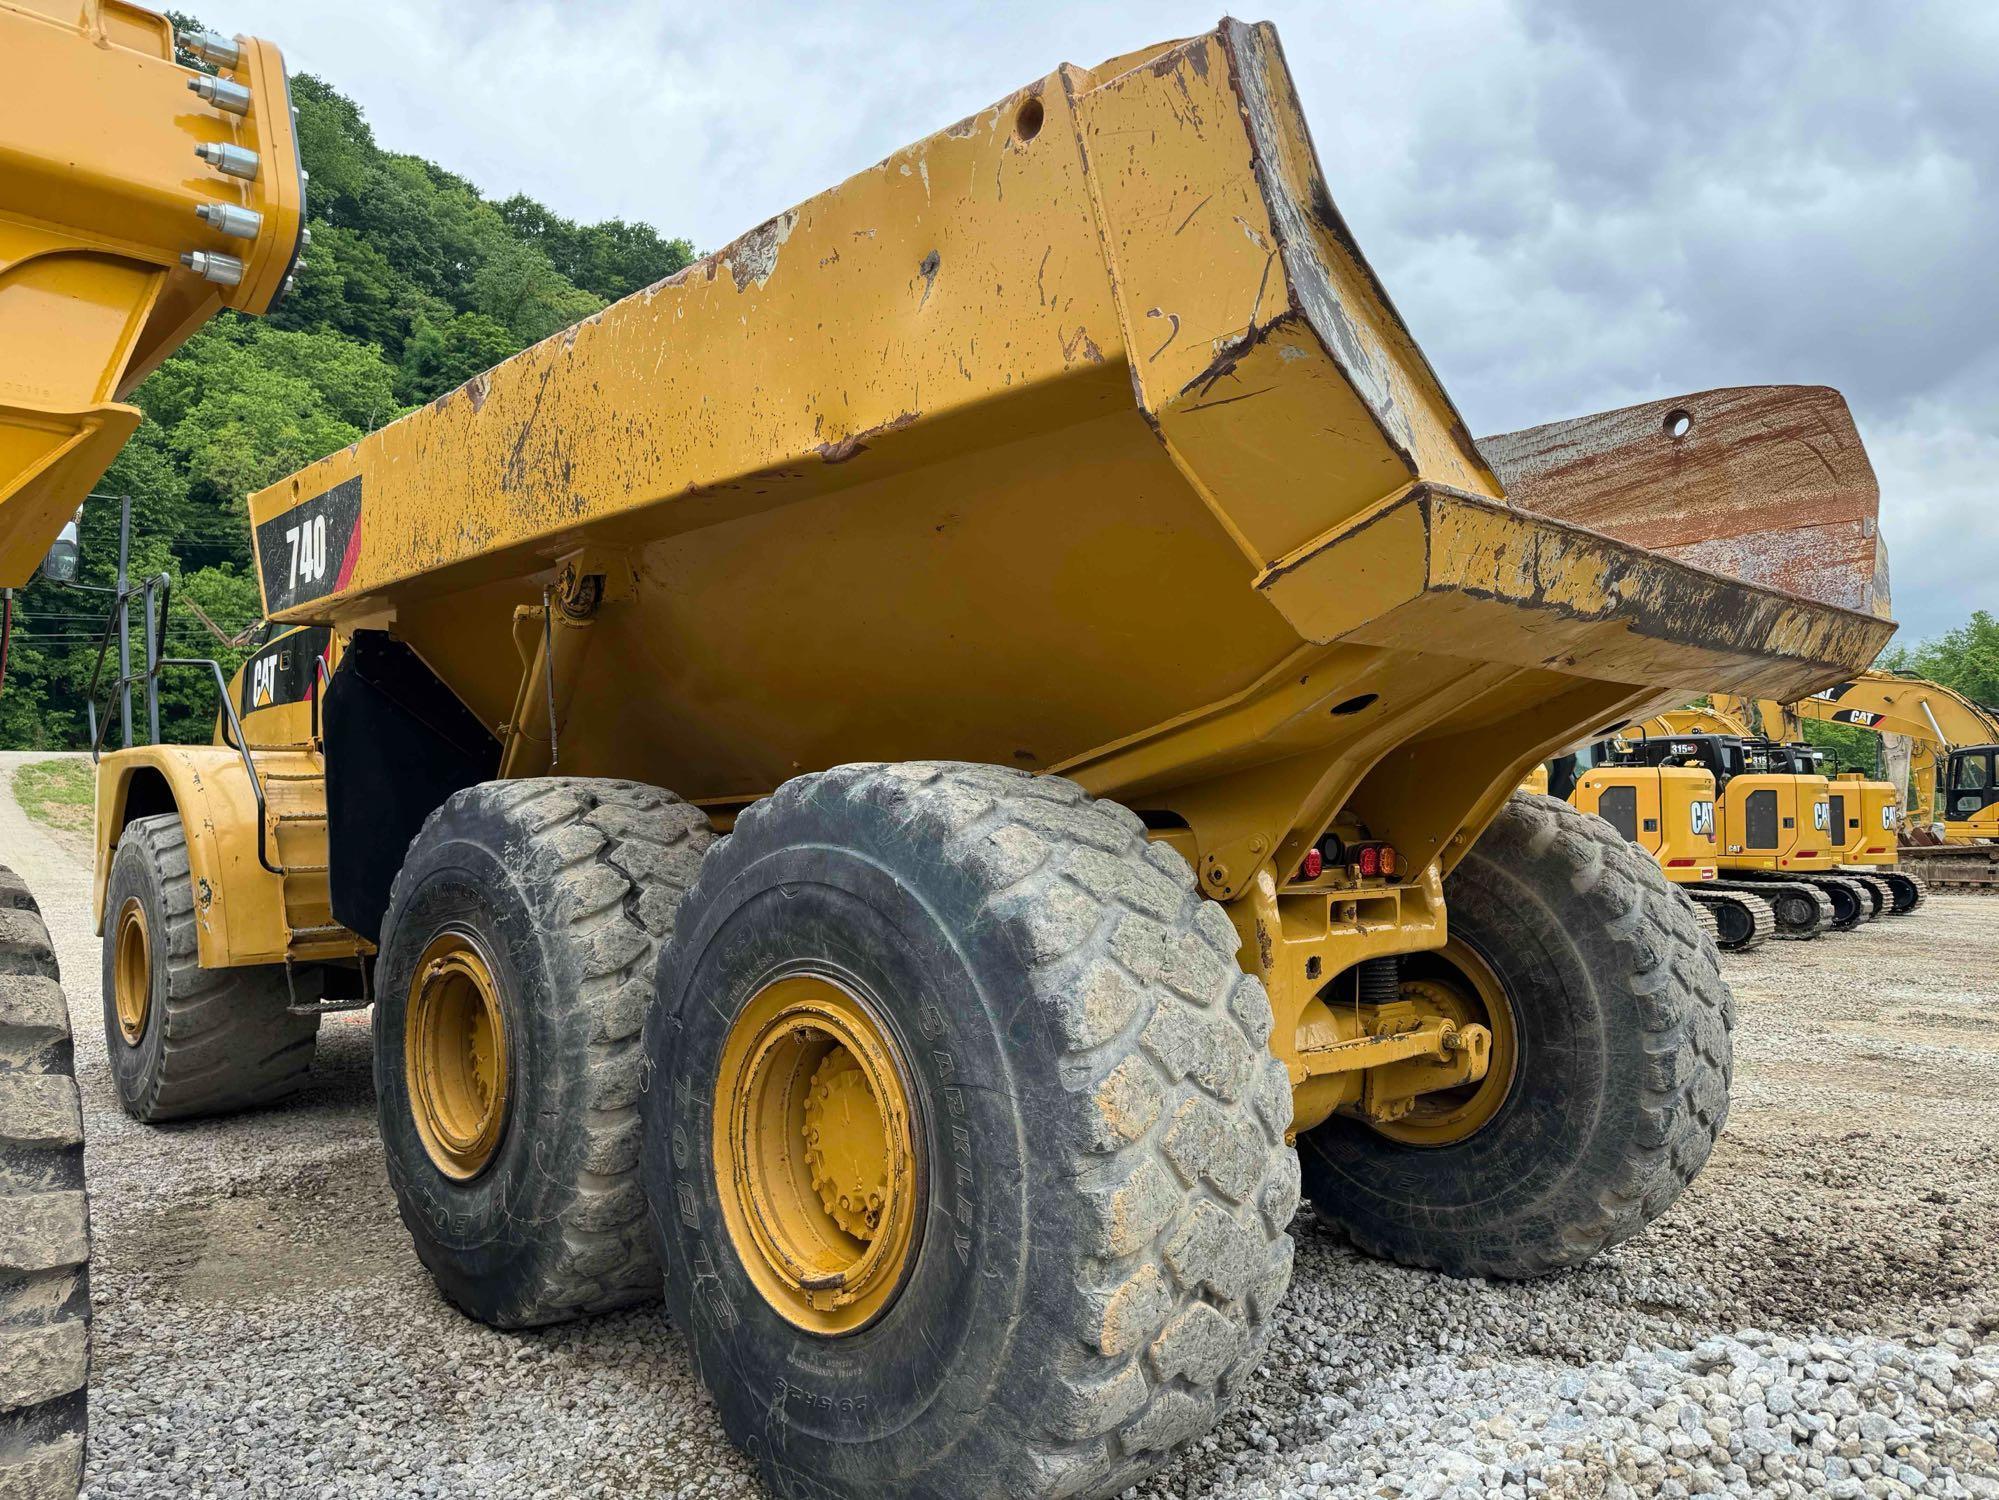 CAT 740 ARTICULATED HAUL TRUCK SN:B1P06302 6x6, powered by Cat diesel engine, equipped with Cab,